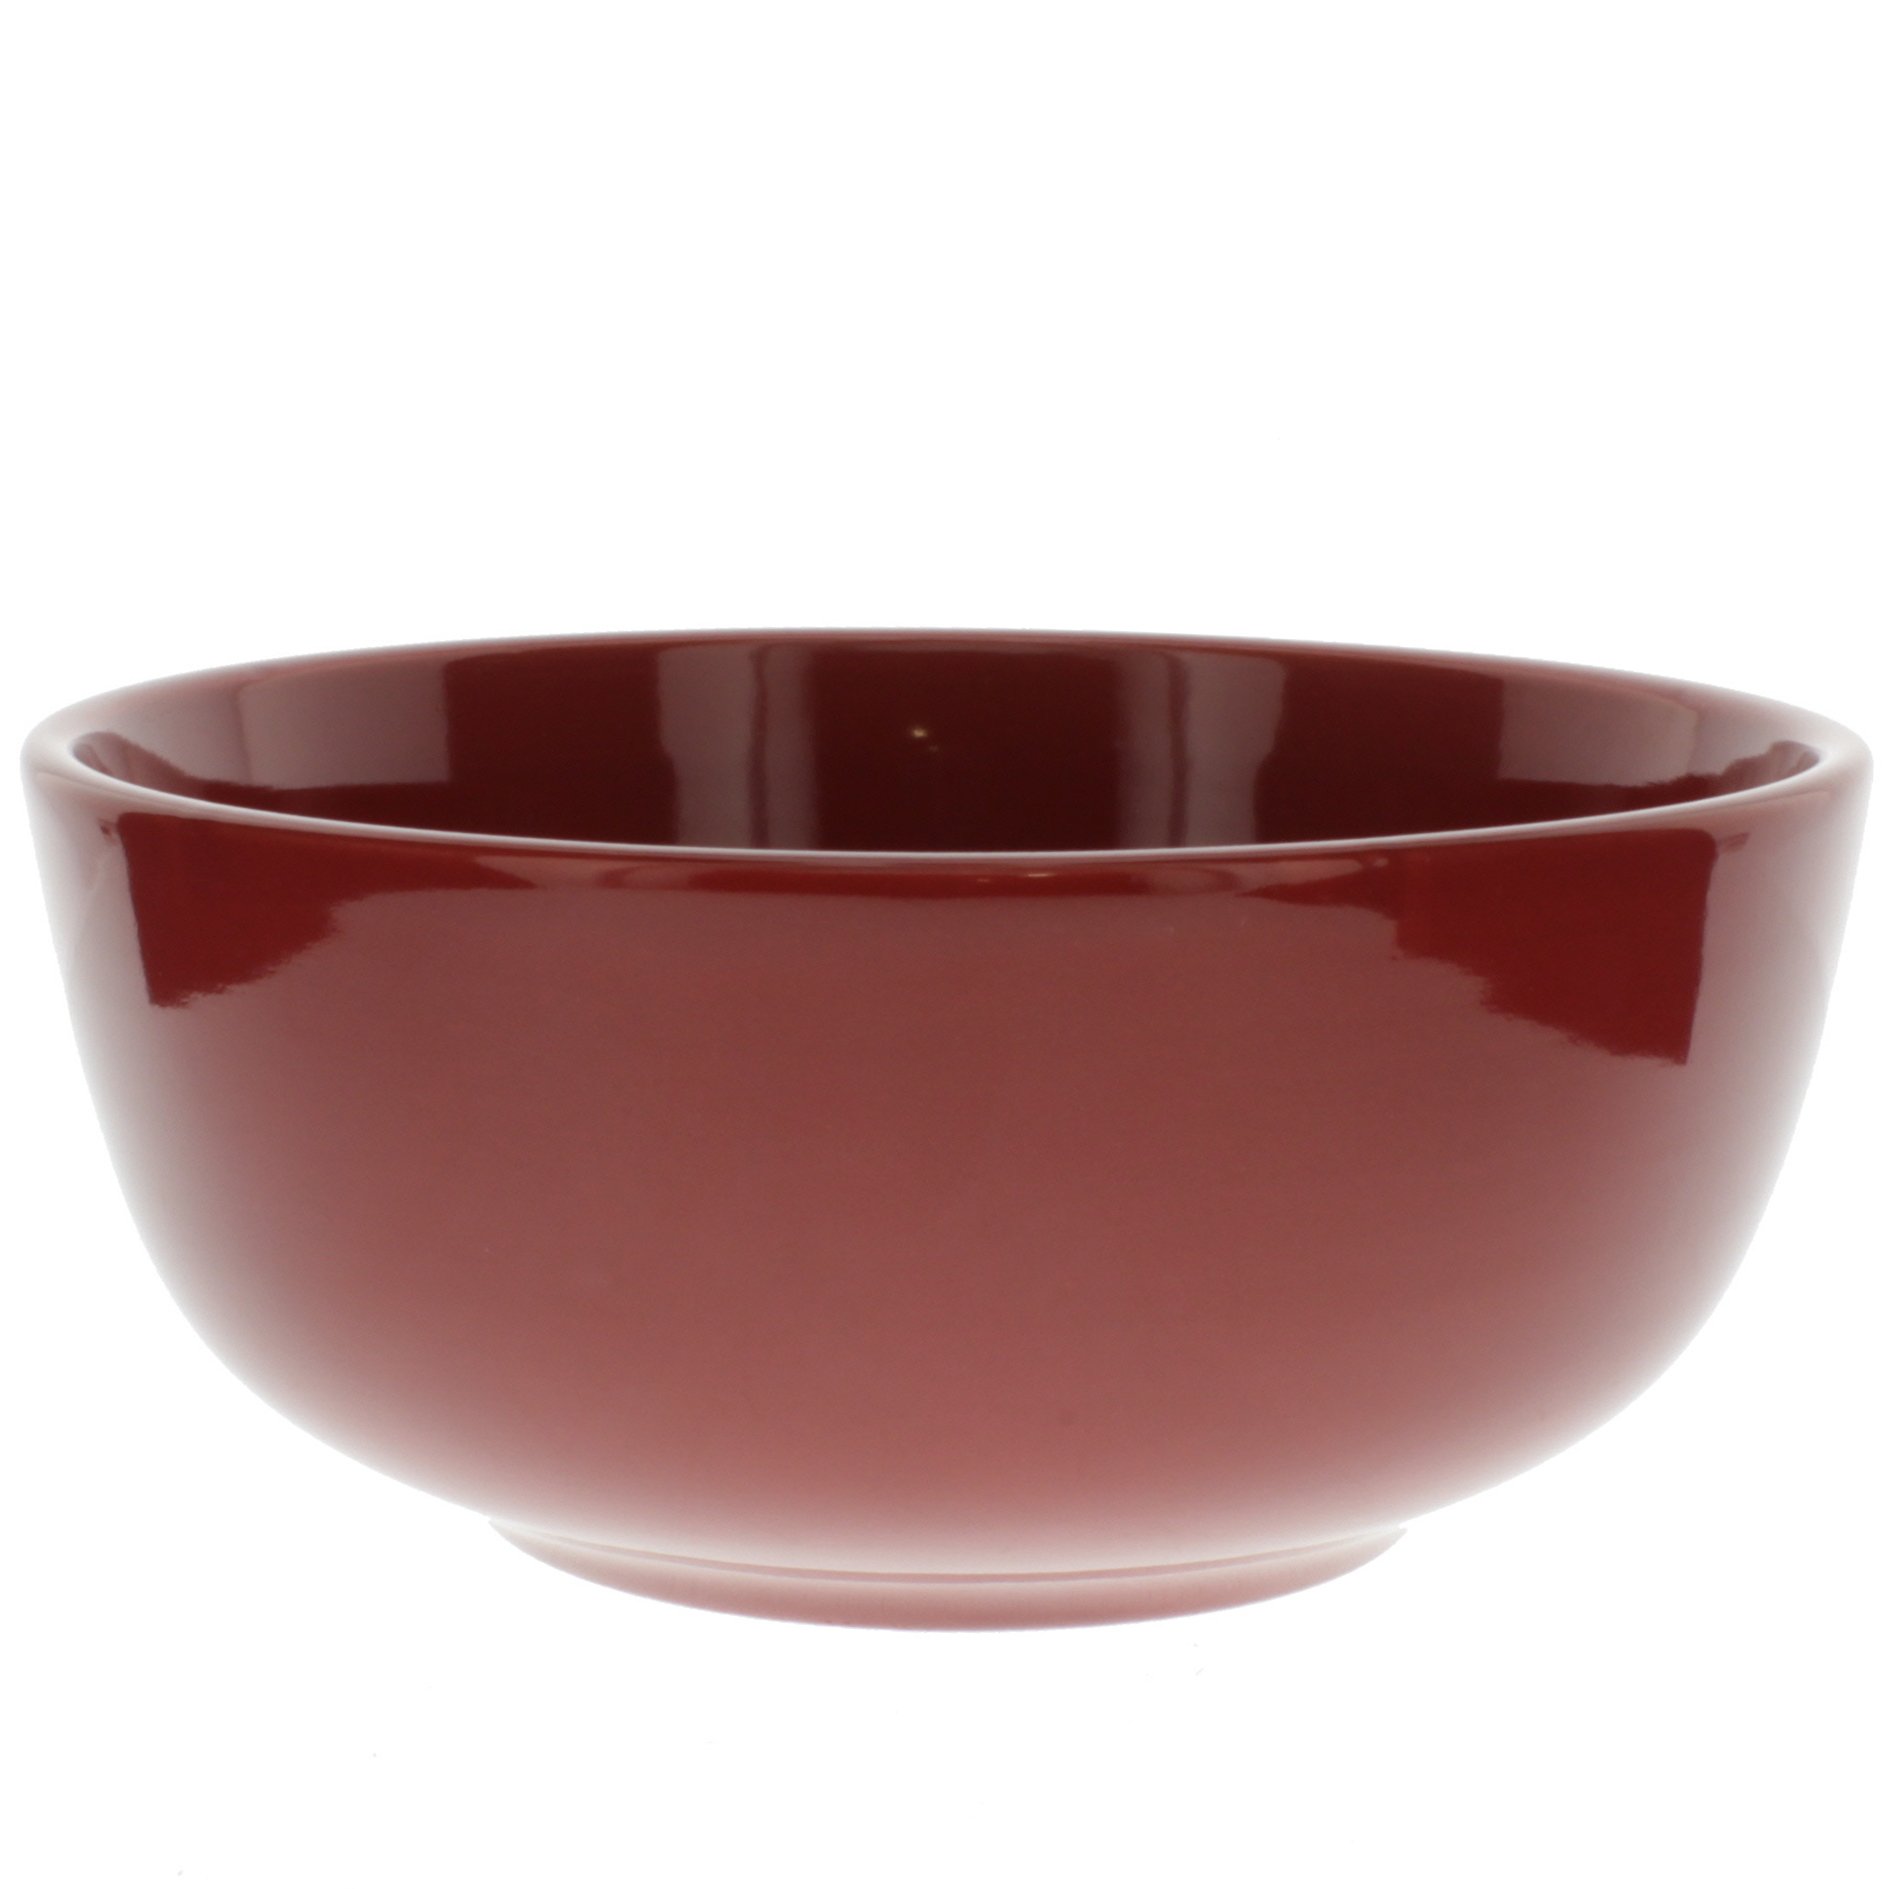 Tabletops Gallery 9-Piece Ceramic Mixing Bowl Set - Red - 20339957